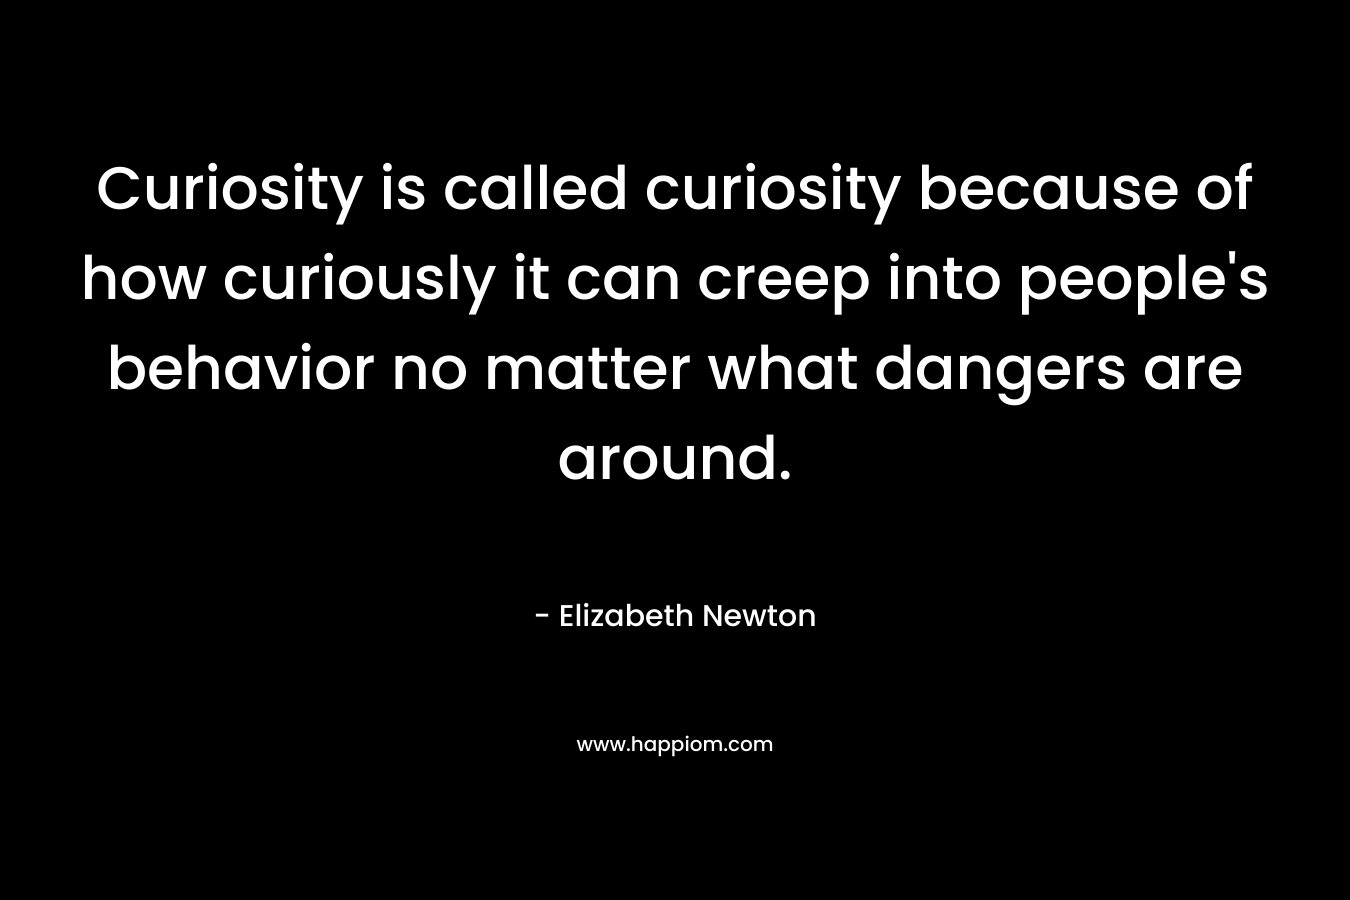 Curiosity is called curiosity because of how curiously it can creep into people’s behavior no matter what dangers are around. – Elizabeth Newton